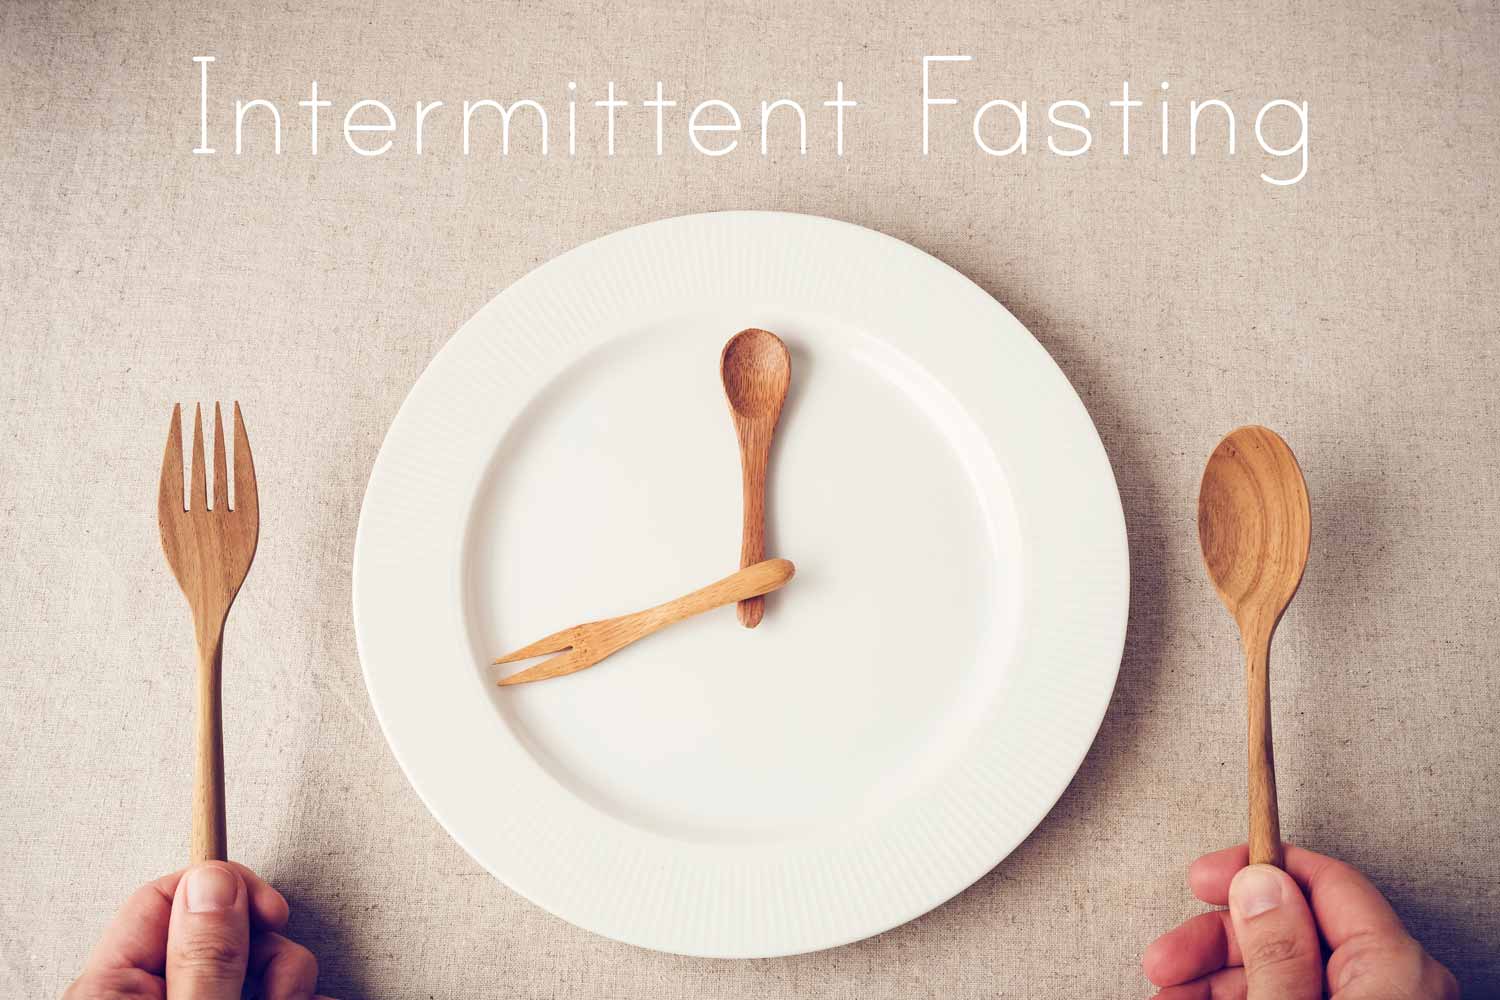 An empty dinner plate. Displaying 16-8 intermittent fasting.